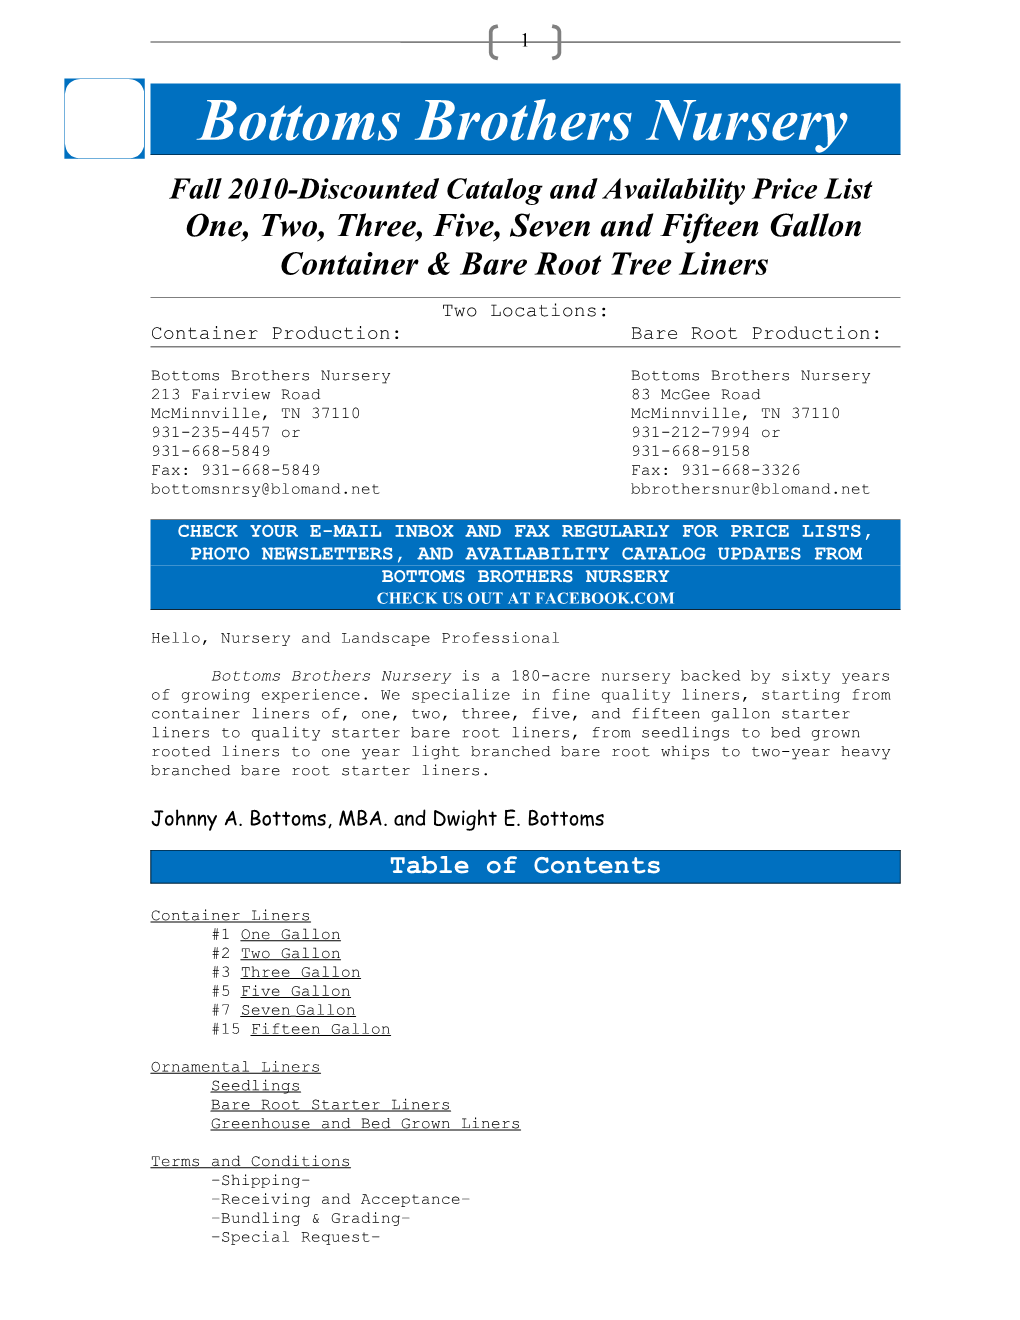 Fall 2010-Discounted Catalog and Availabilityprice List